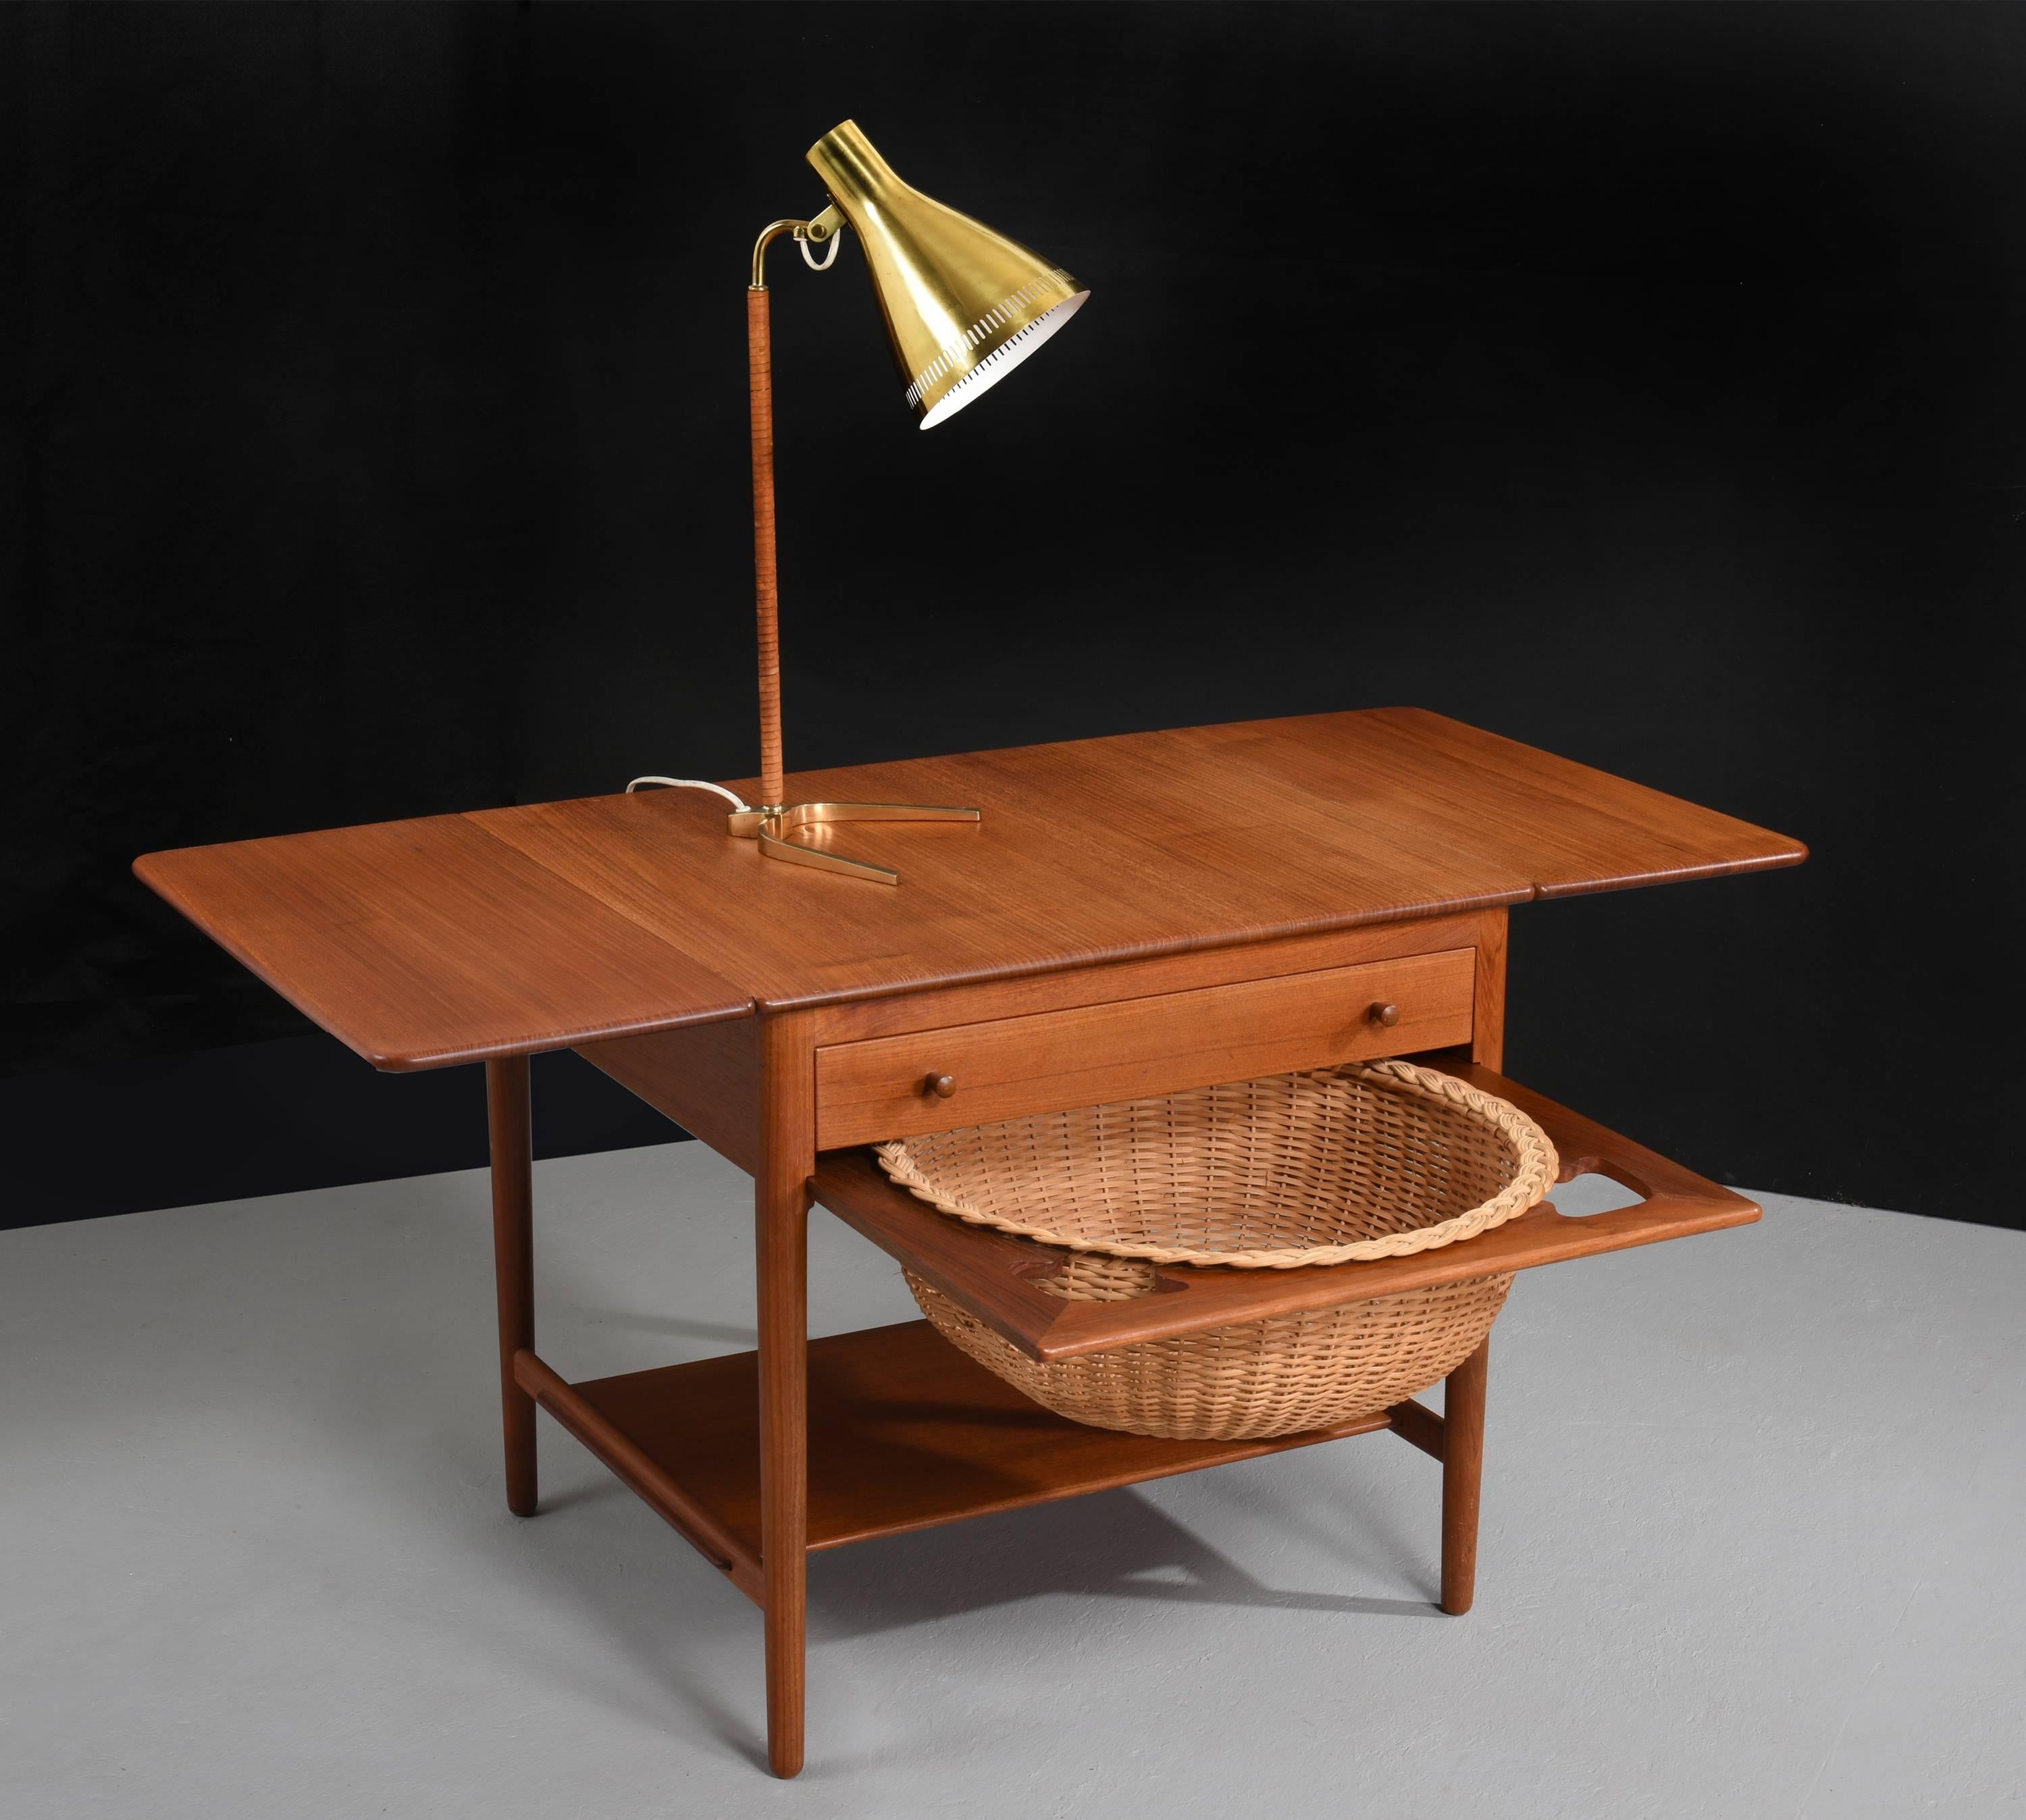 Sewing table by Hans J. Wegner for Andreas Tuck, Model AT-33,

Denmark, 1960s
Teak, cane.

Features two drop down leaves, pull out sewing basket and drawer with dividers, storage and spindles.

60 H x 67 W x 58 D cm.
119 cm wide when fully